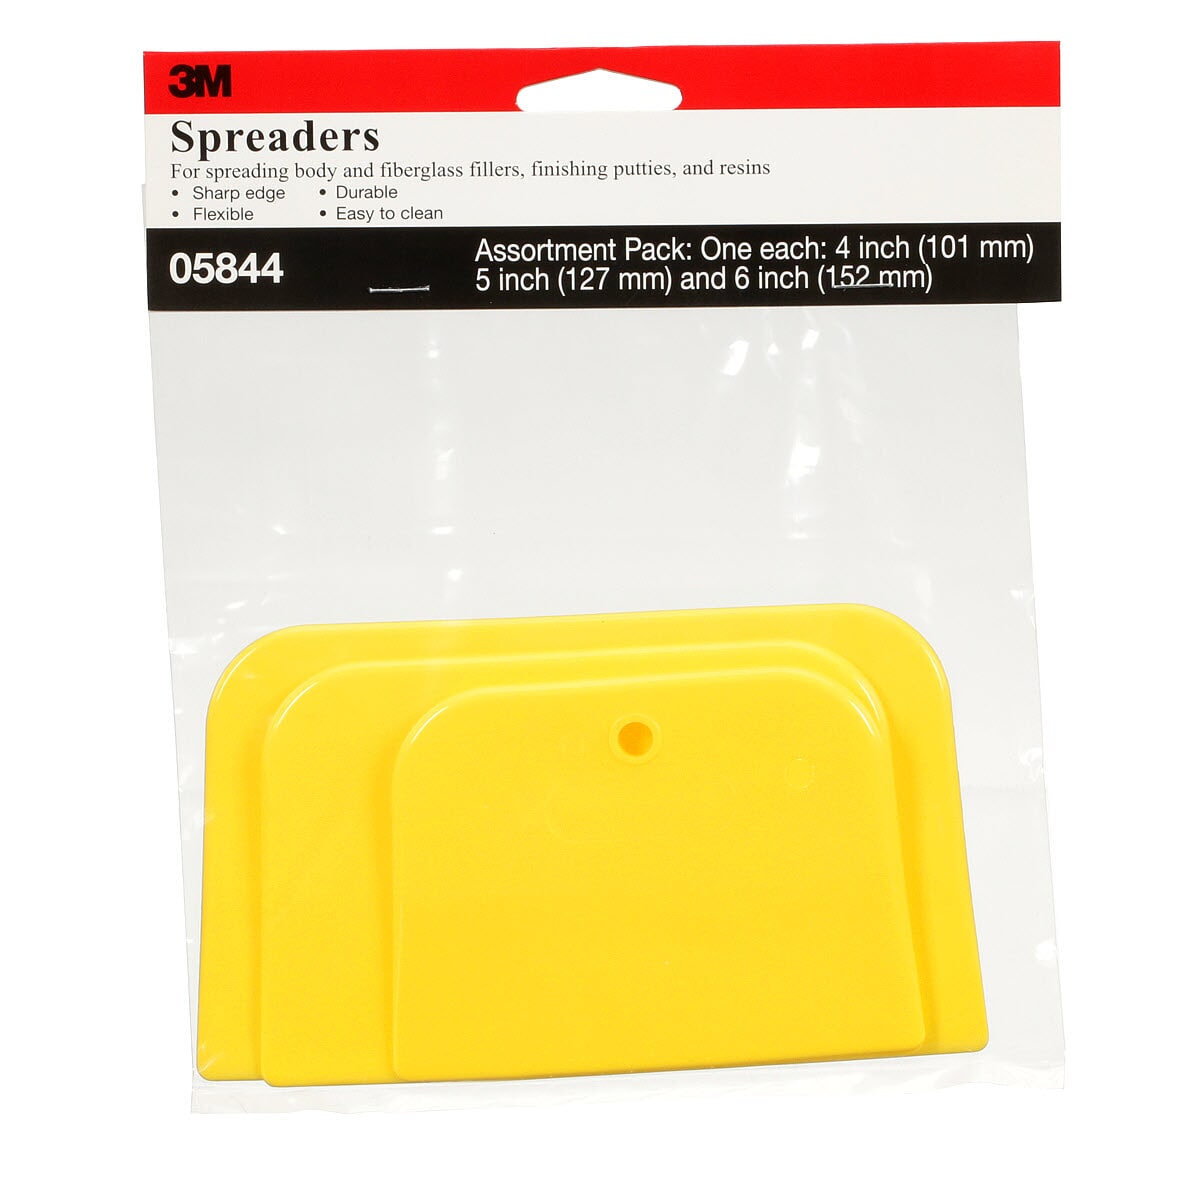 3M 7100143457 Spreader, 4 in, 5 in, 6 in W, For Use With Fiberglass Fillers, Finishing Putties, Resins and Spreading Body, Plastic, Yellow